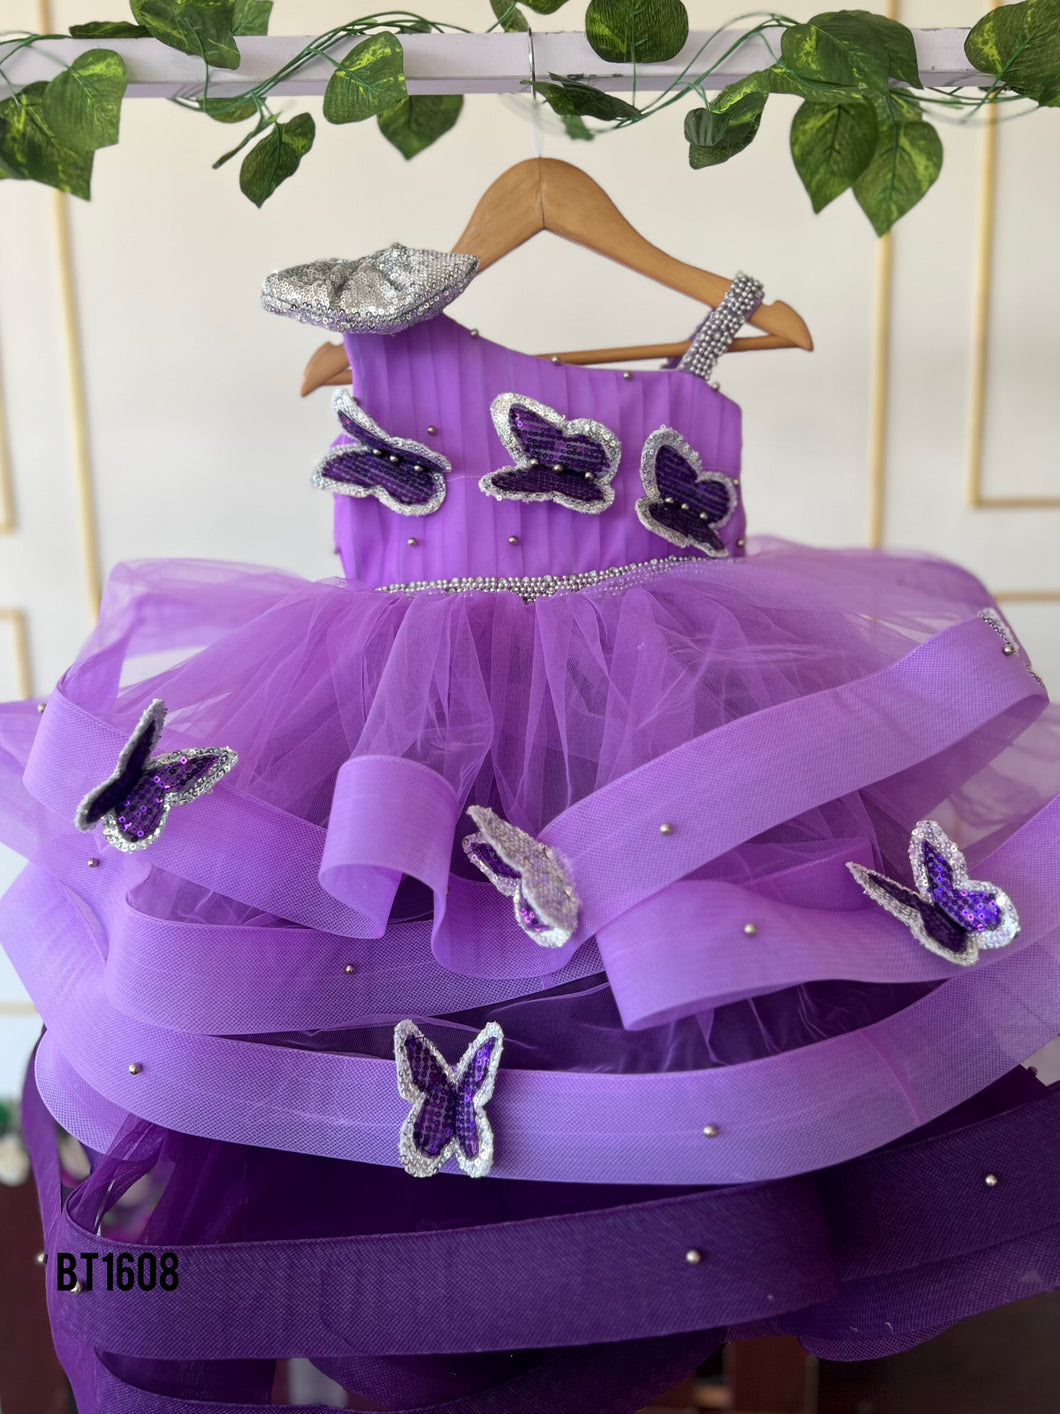 BT1608 Butterfly Theme Luxury Birthday Party Dress For Baby Girls